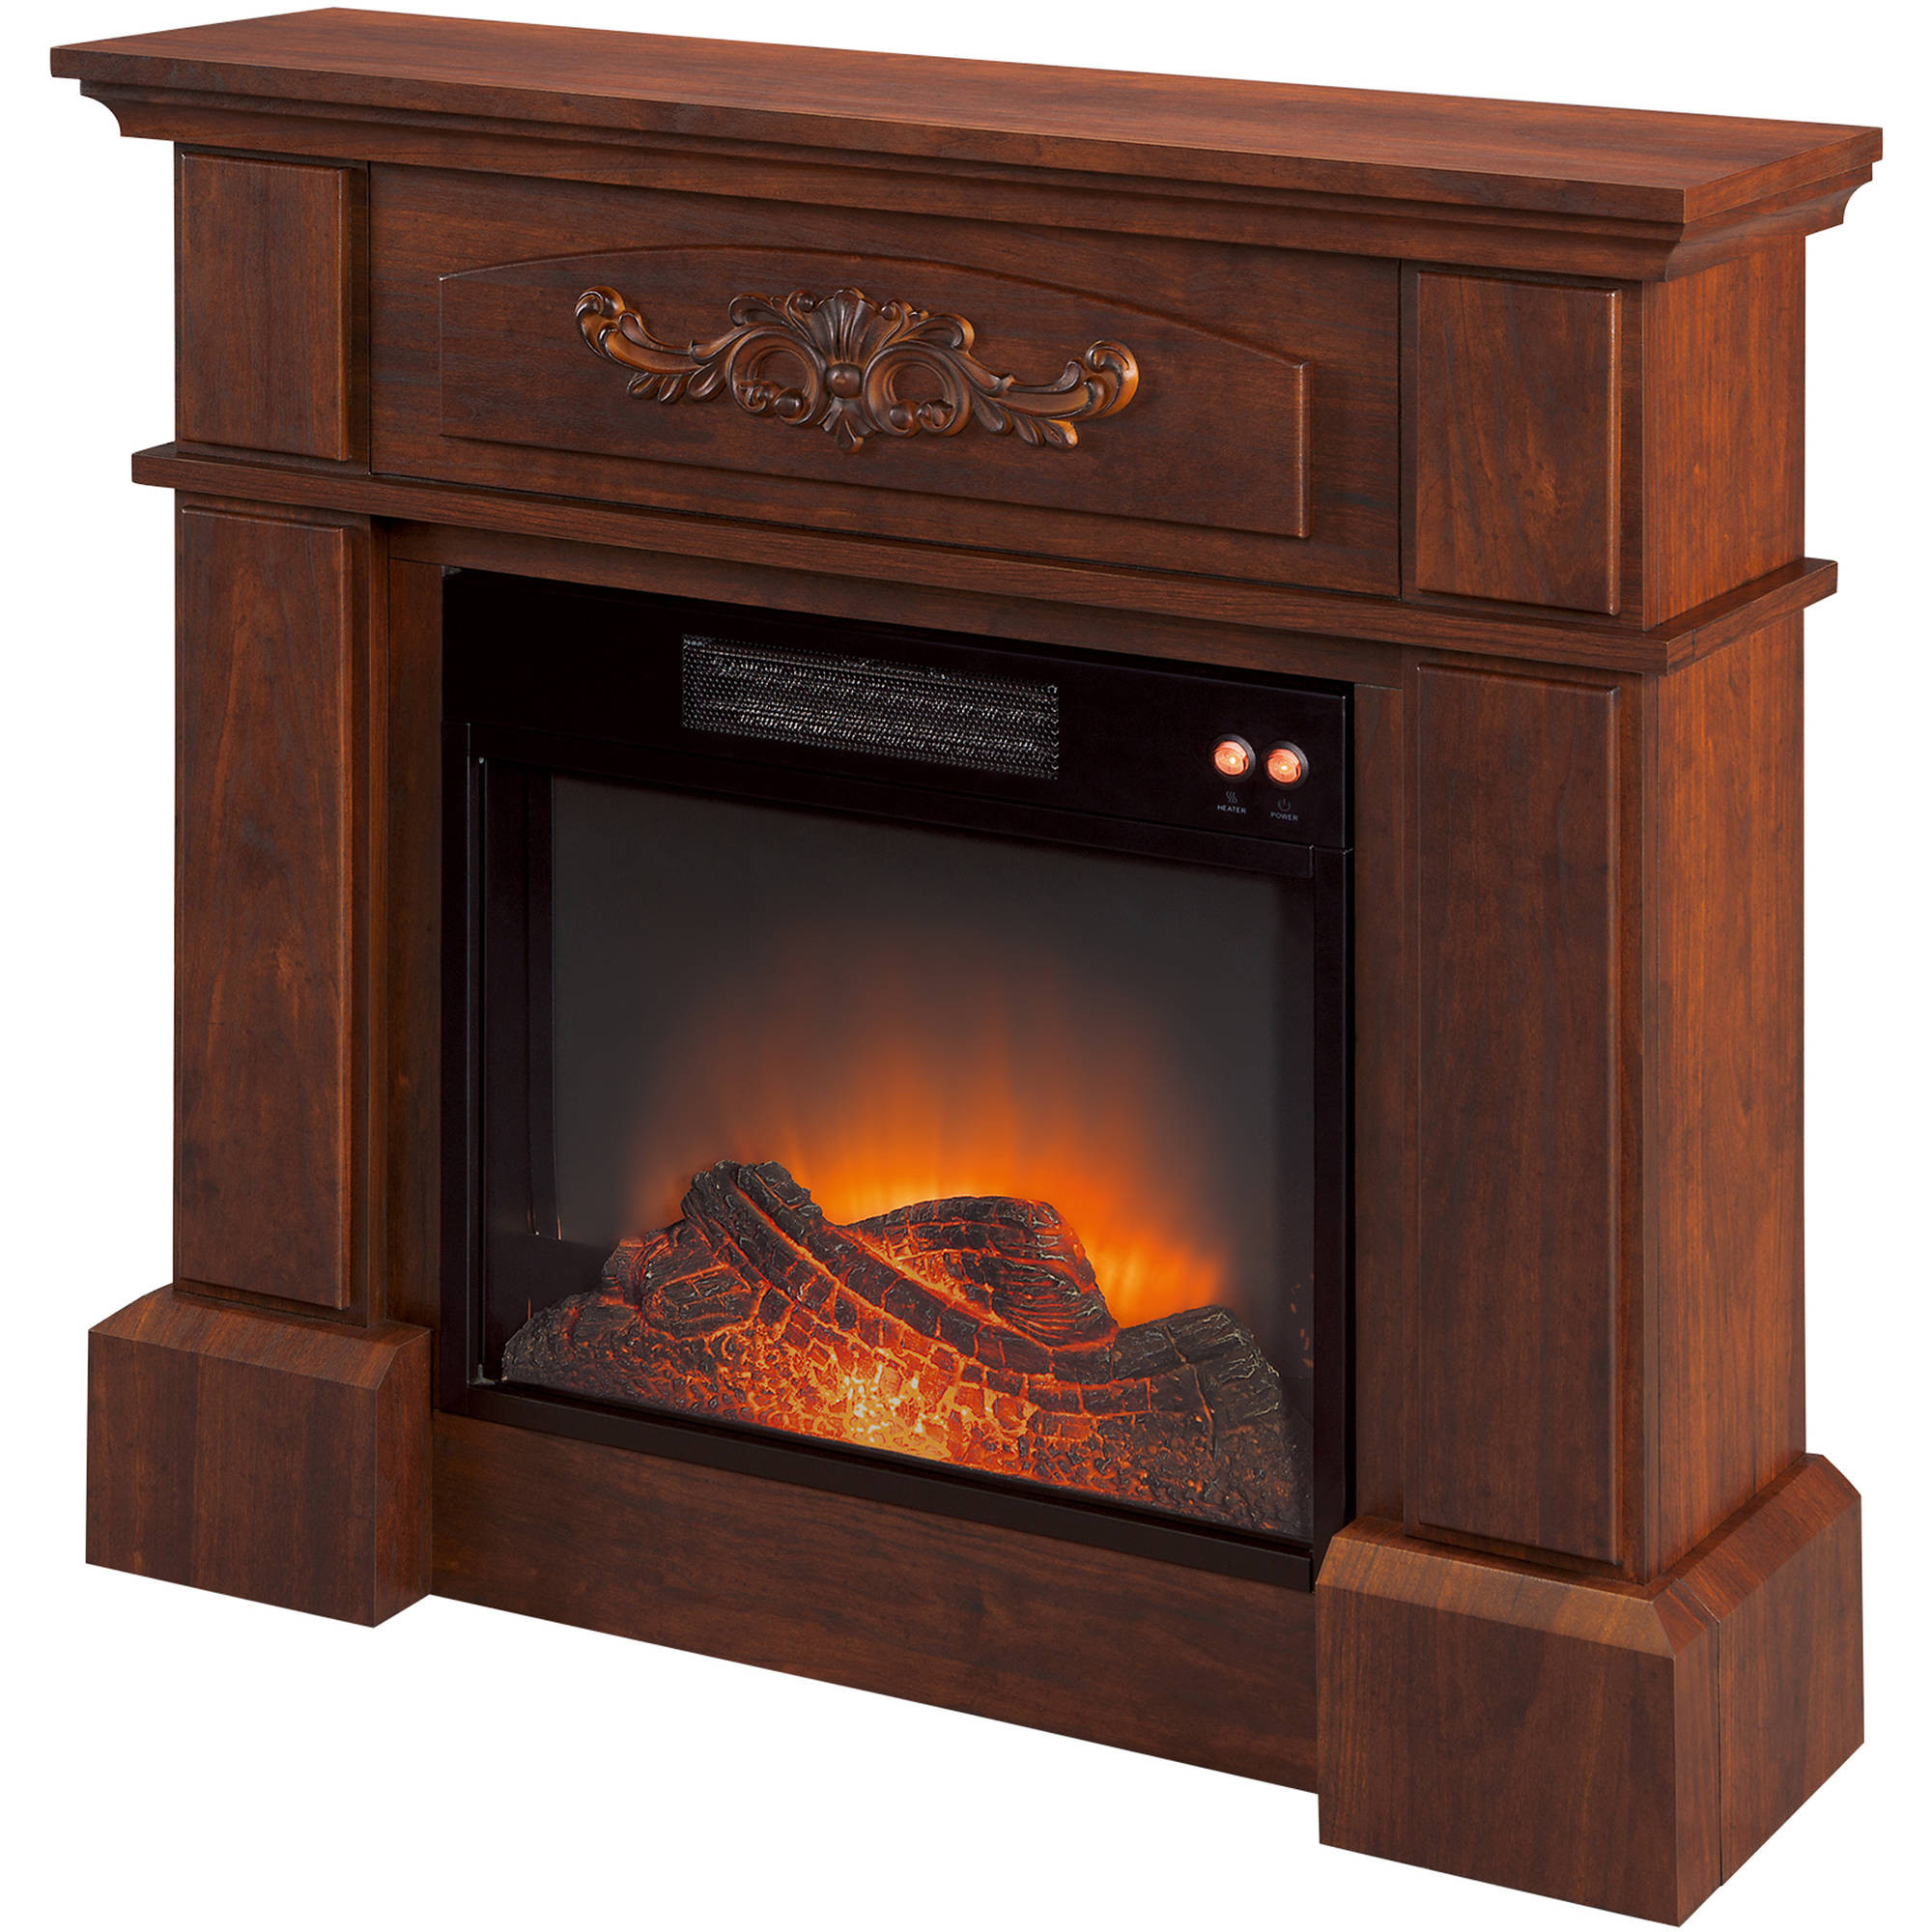 Corner Electric Fireplace Lowes
 Inspirations Electric Fireplace Tv Stand Lowes For